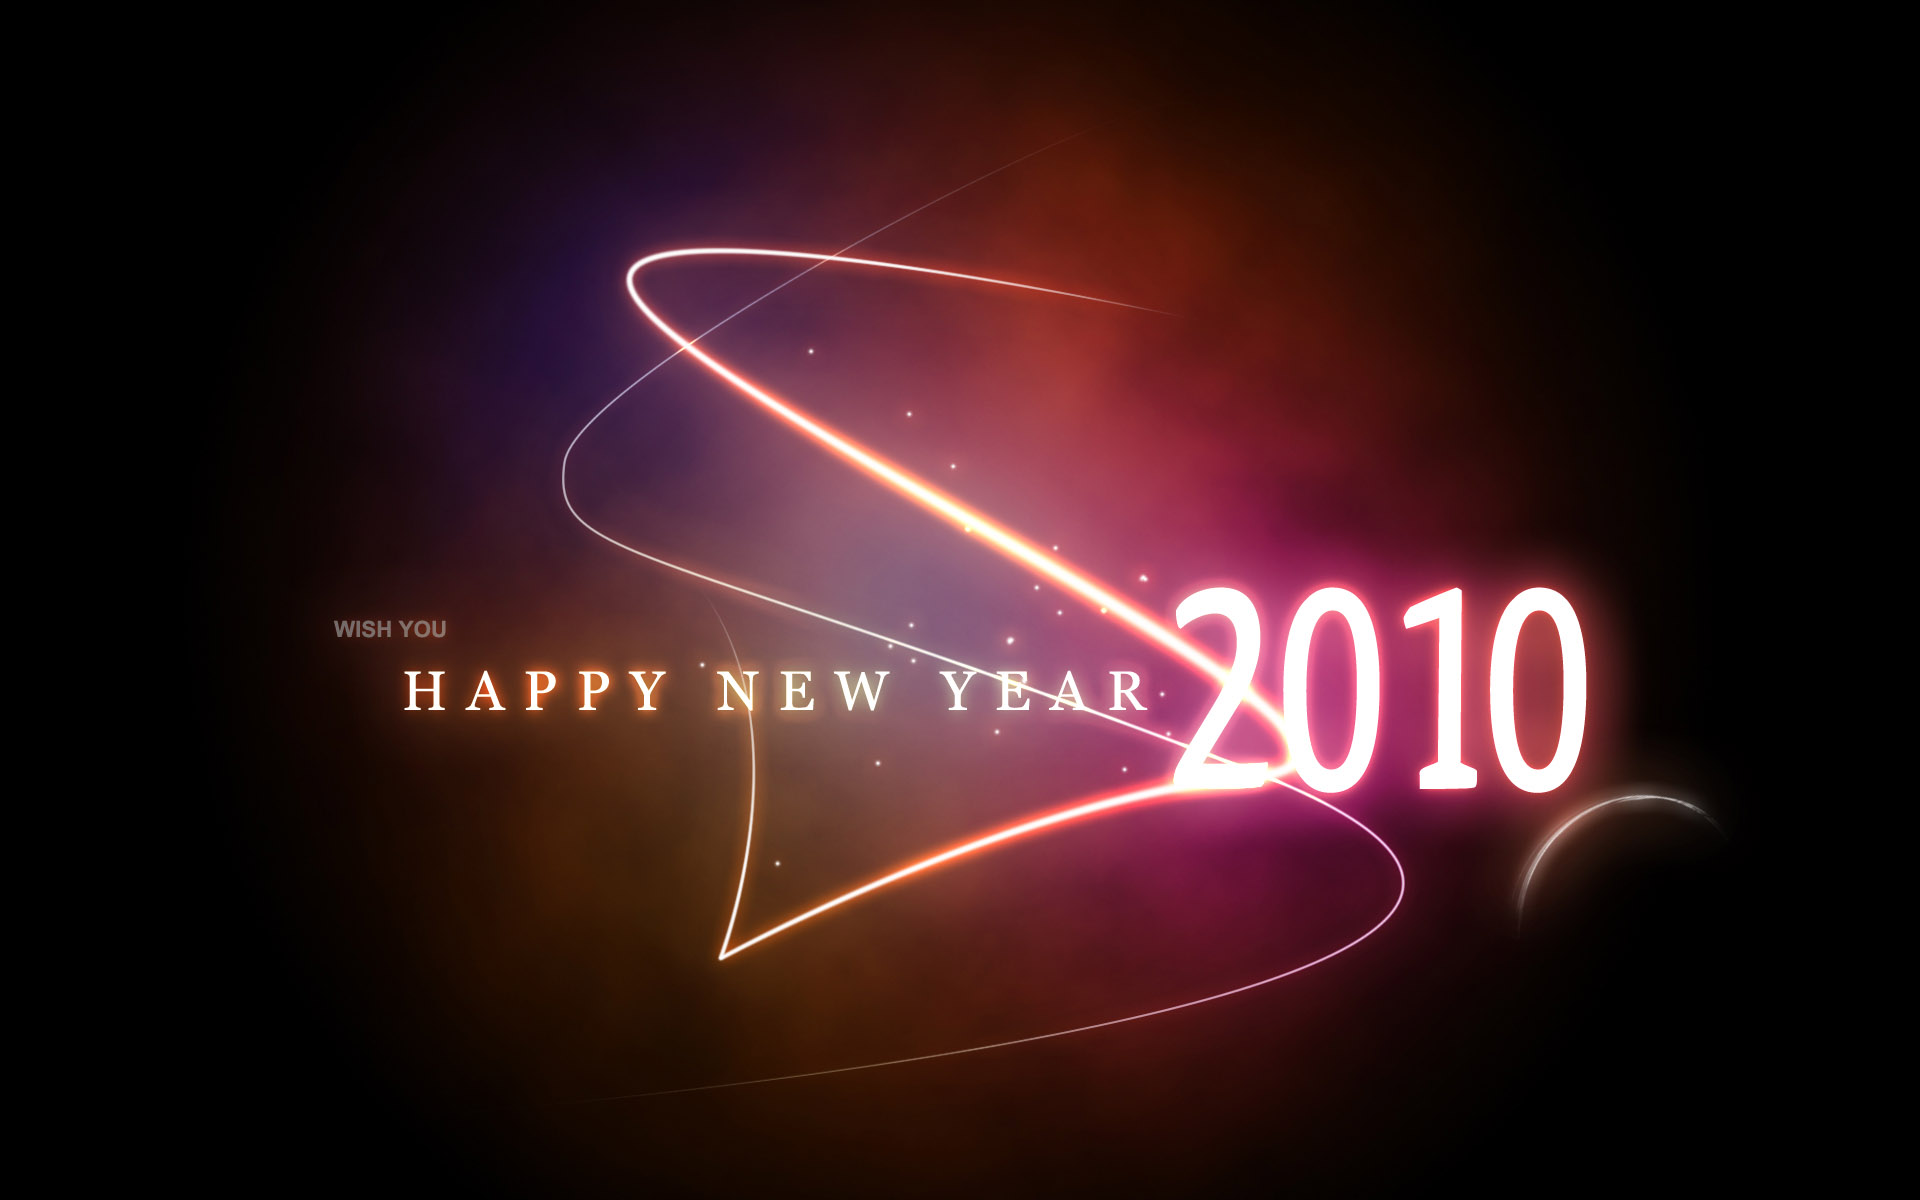 Download HQ Happy New Year 2010 wallpaper / Holidays / 1920x1200